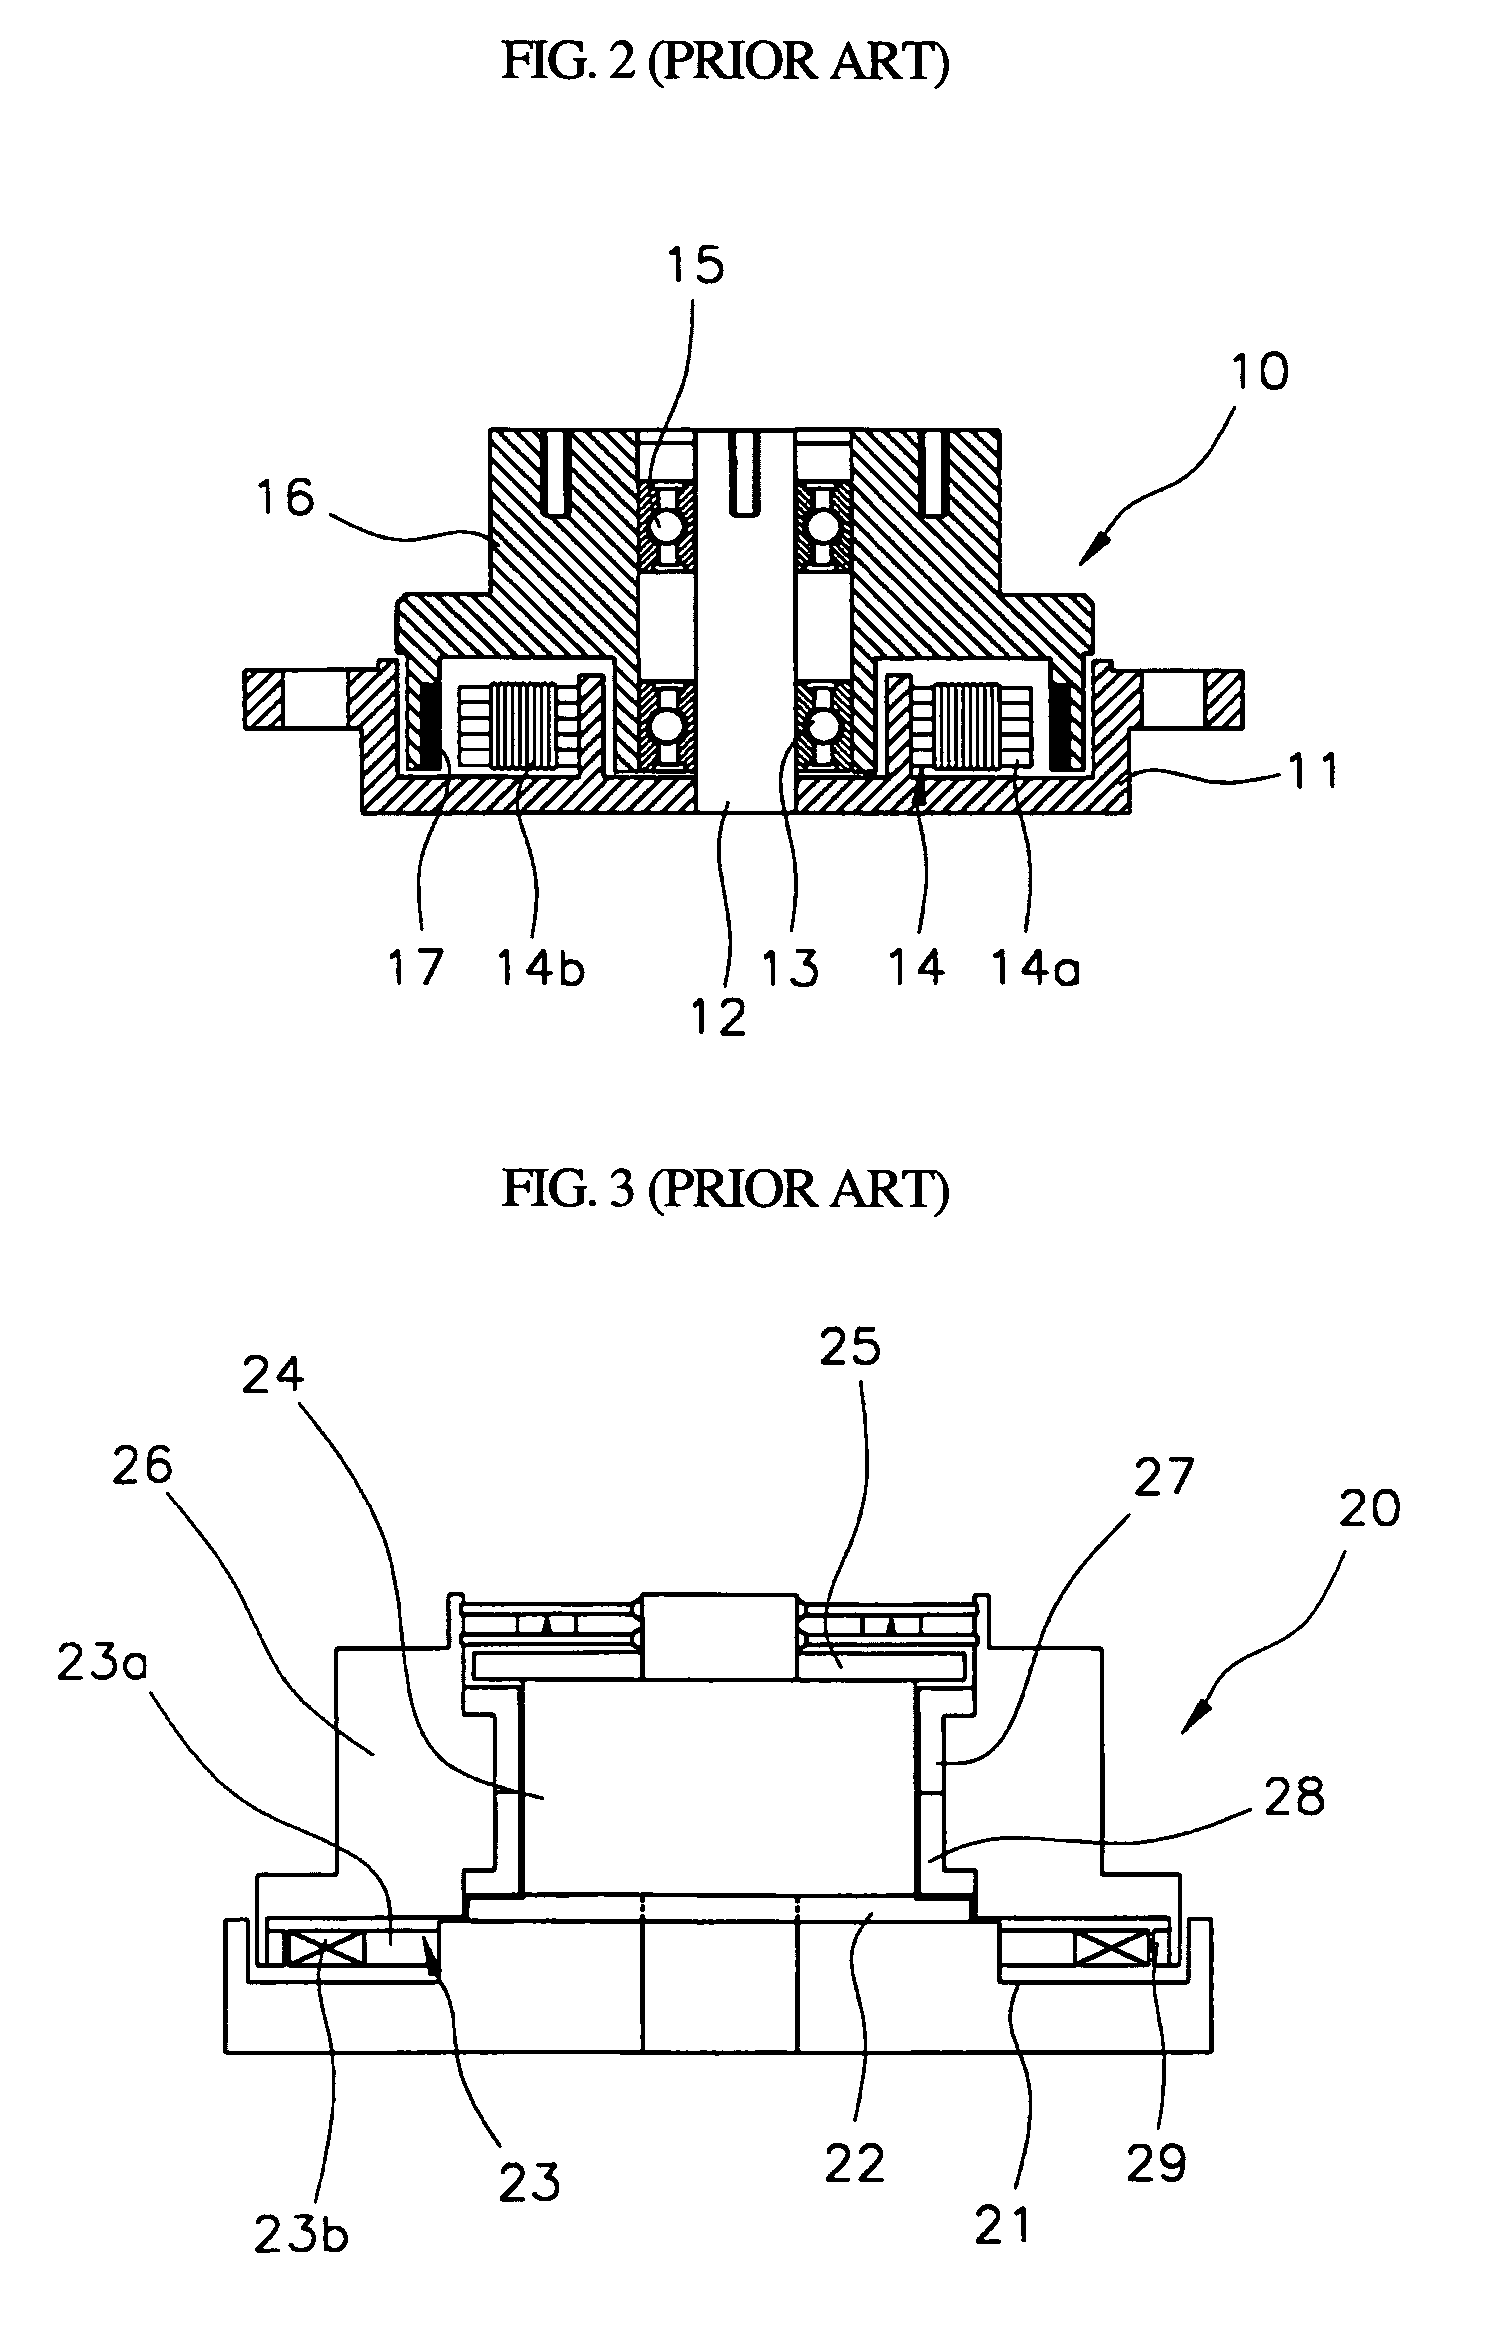 Aerodynamic bearing assembly for spindle motor for hard disk drives